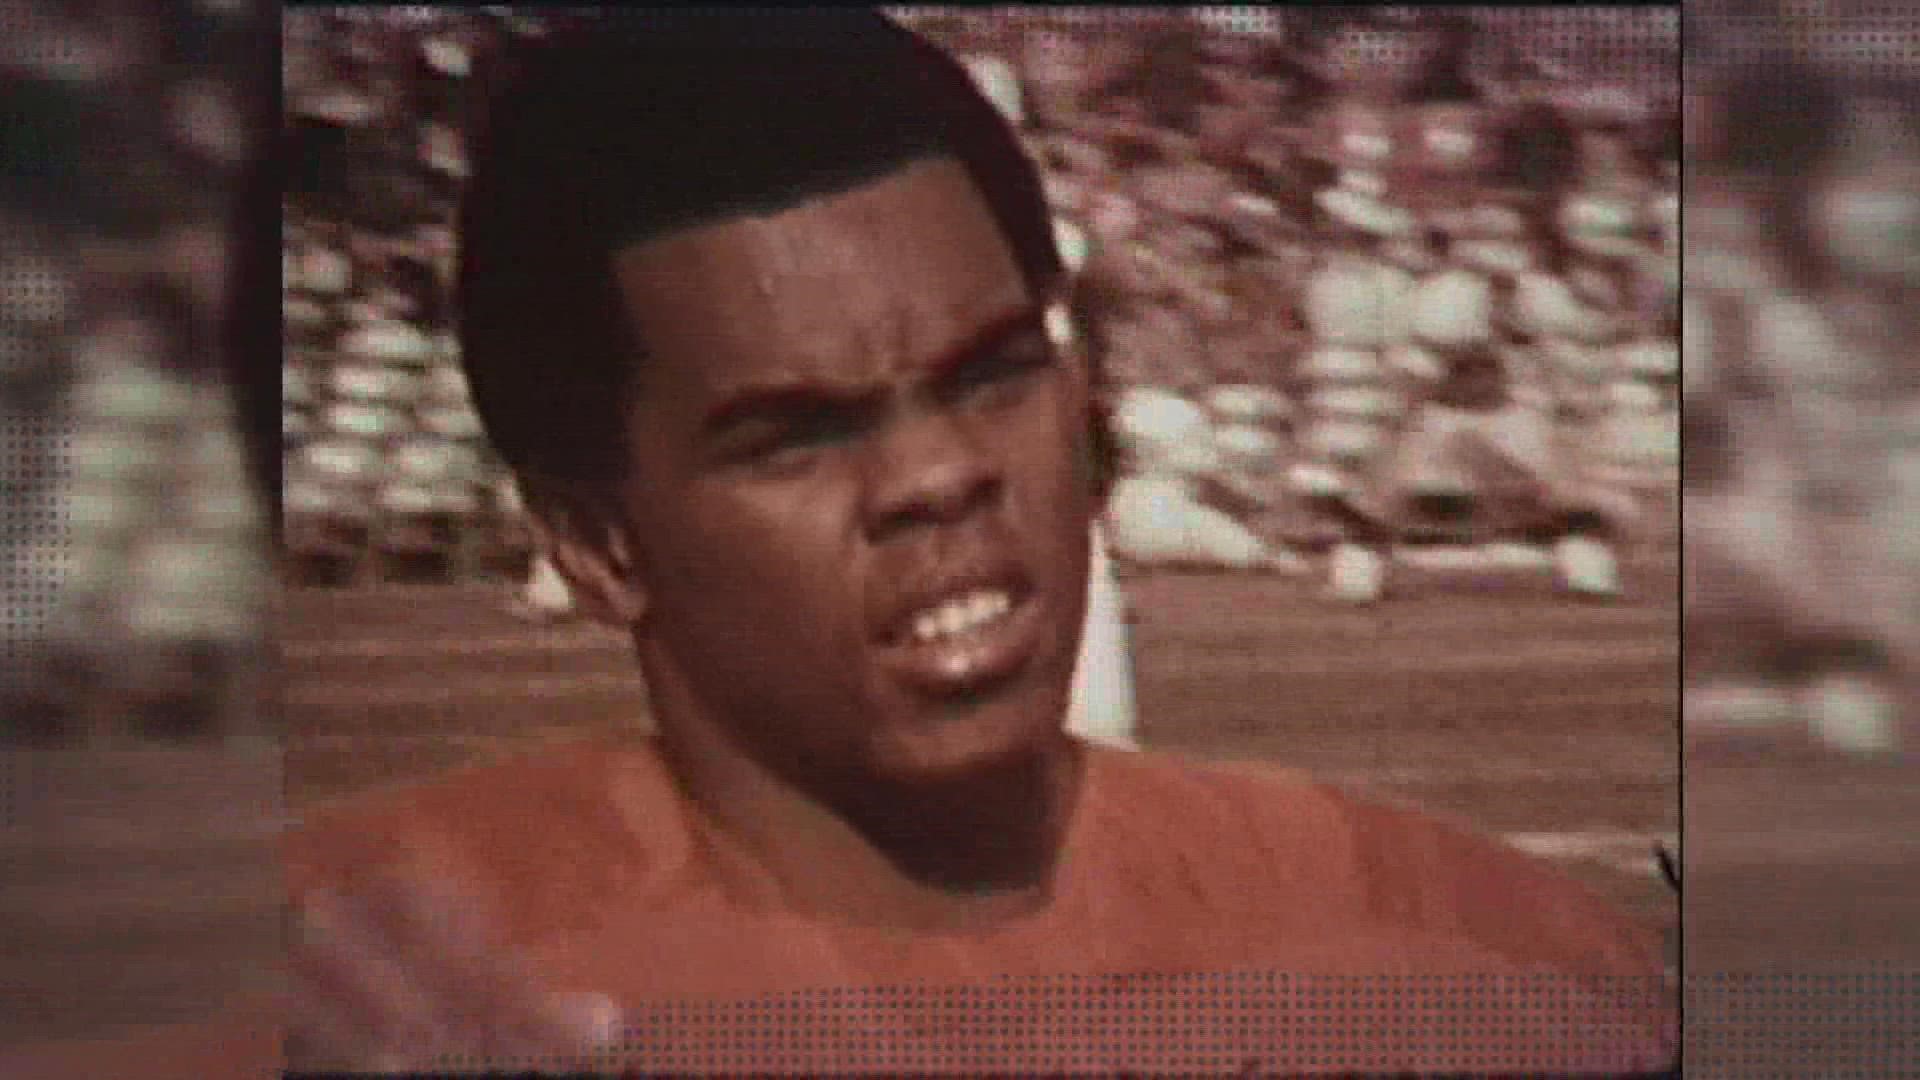 The 5-foot-10 dynamo nicknamed “The Magician” set the Denver Broncos record for touchdown passes as a rookie in 1968 with 14.